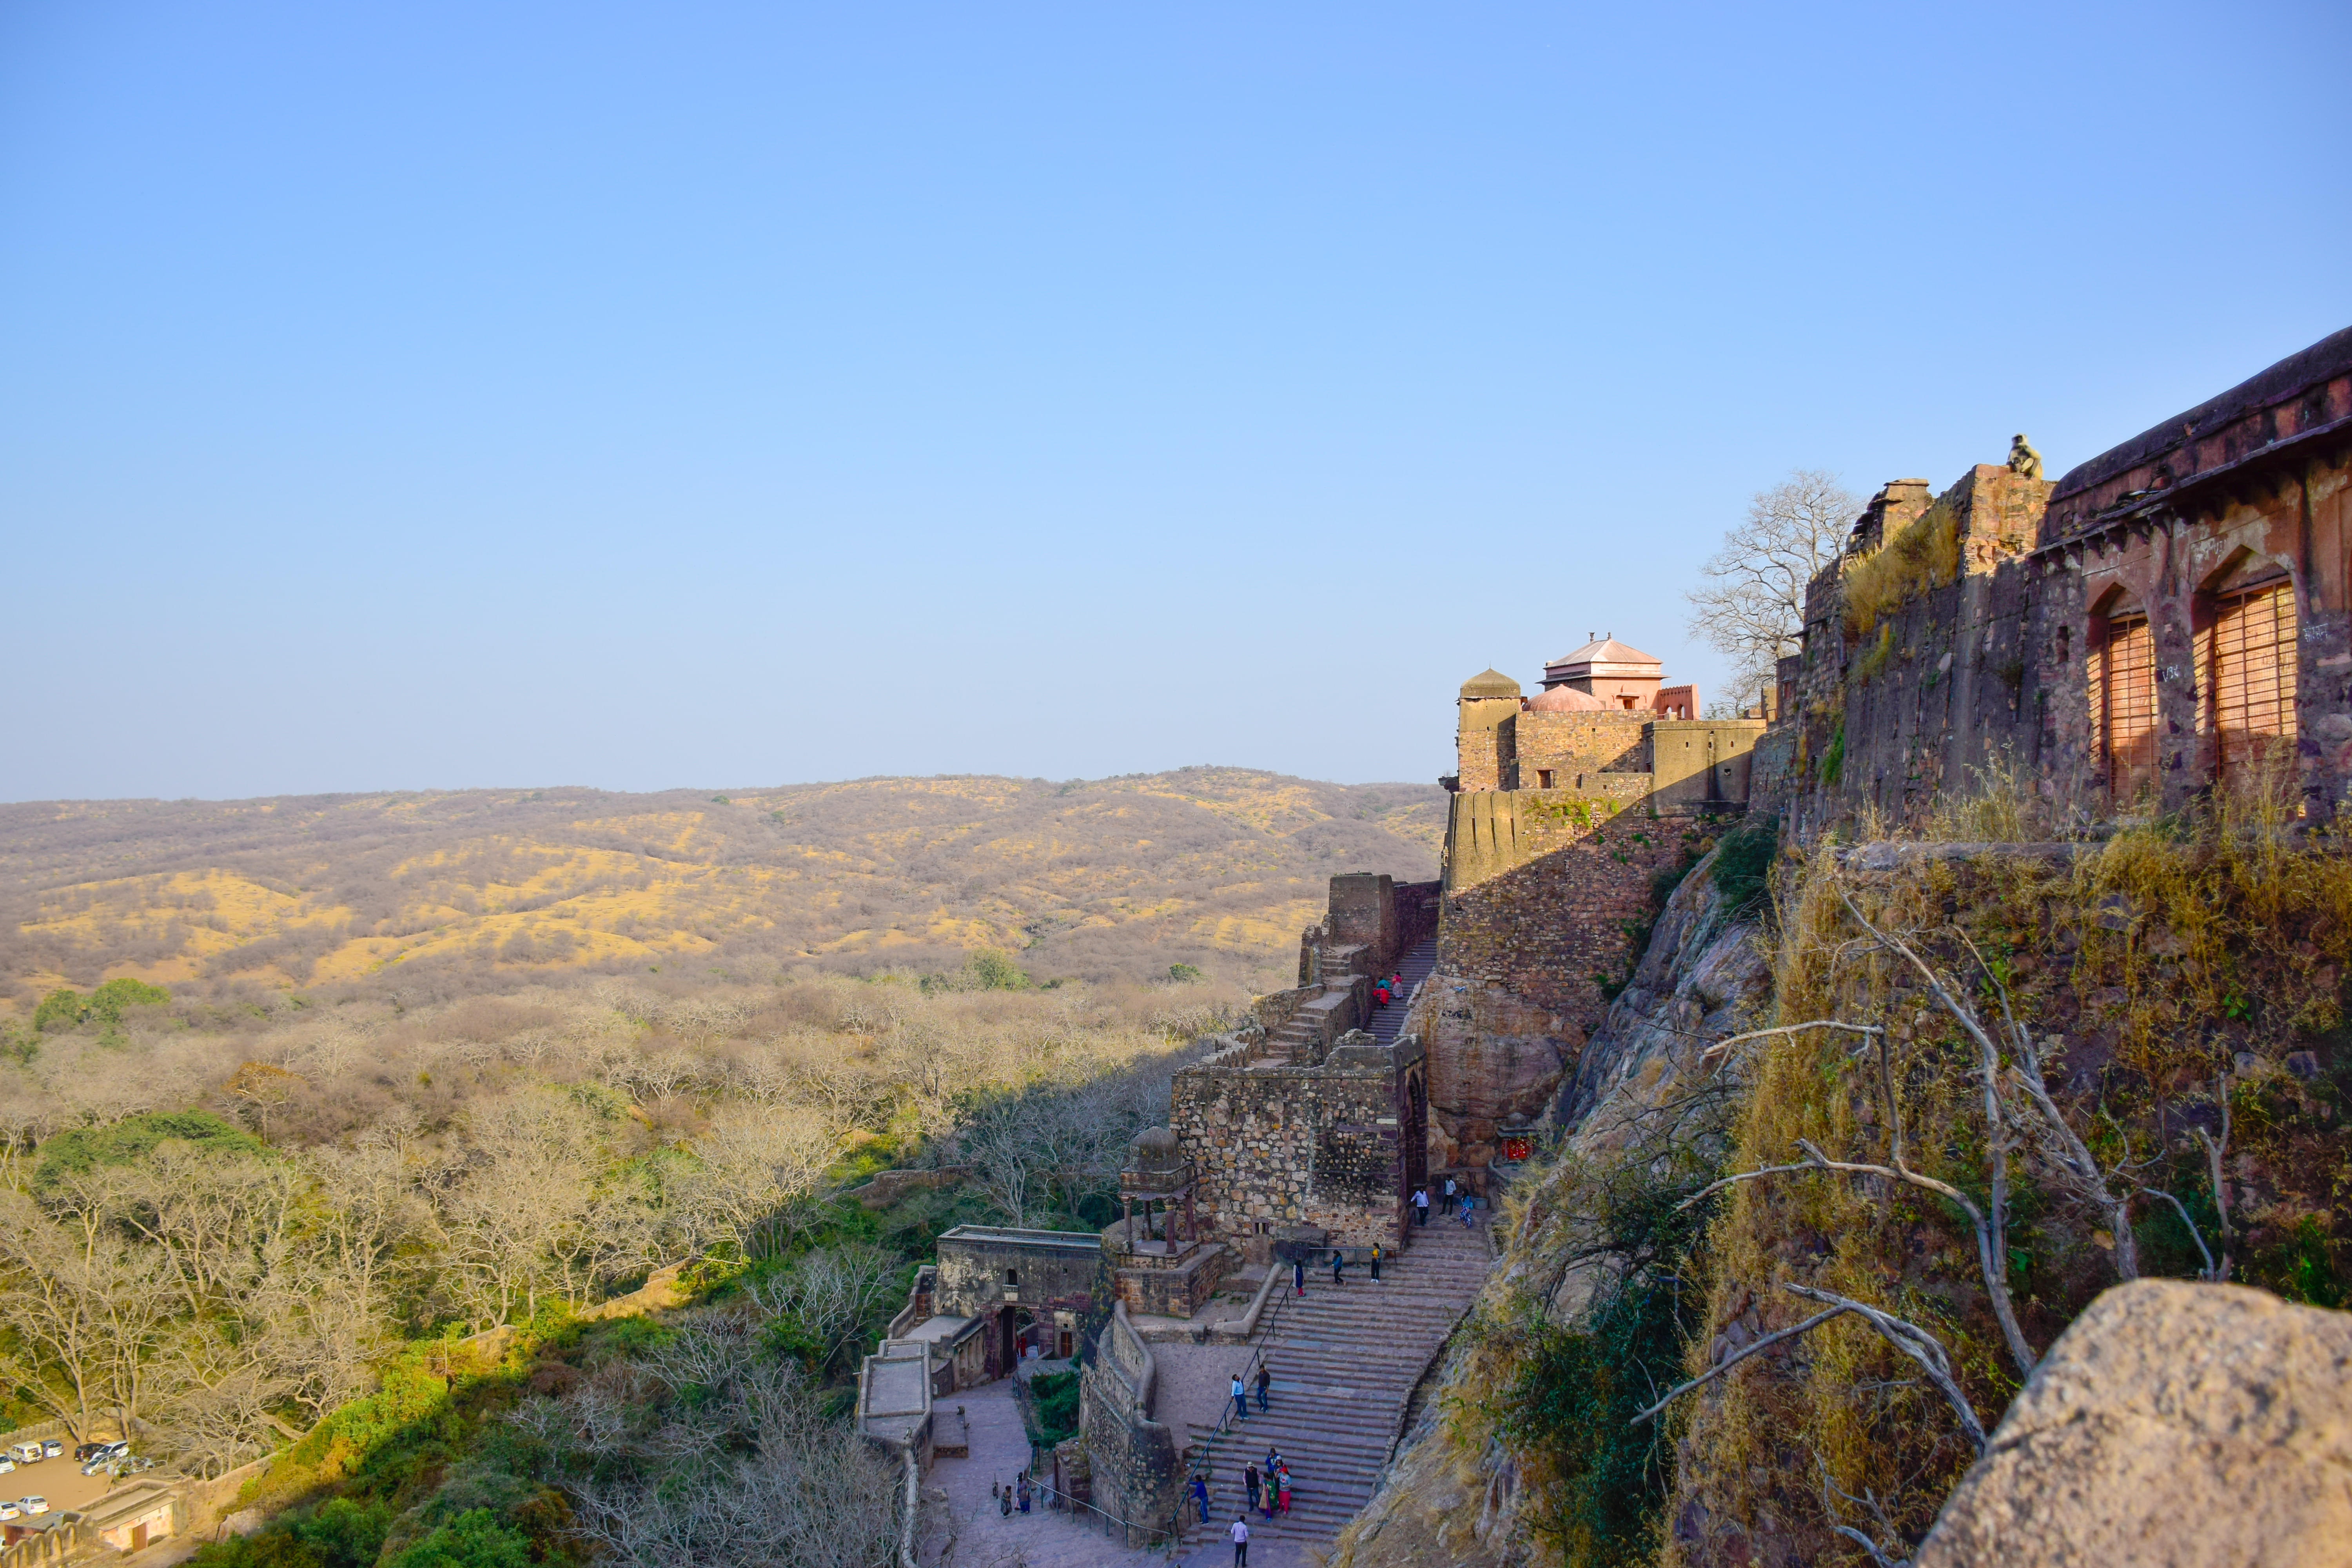 Take a tour of the Ranthambore Fort on the Ranthambore weekend tour from Delhi